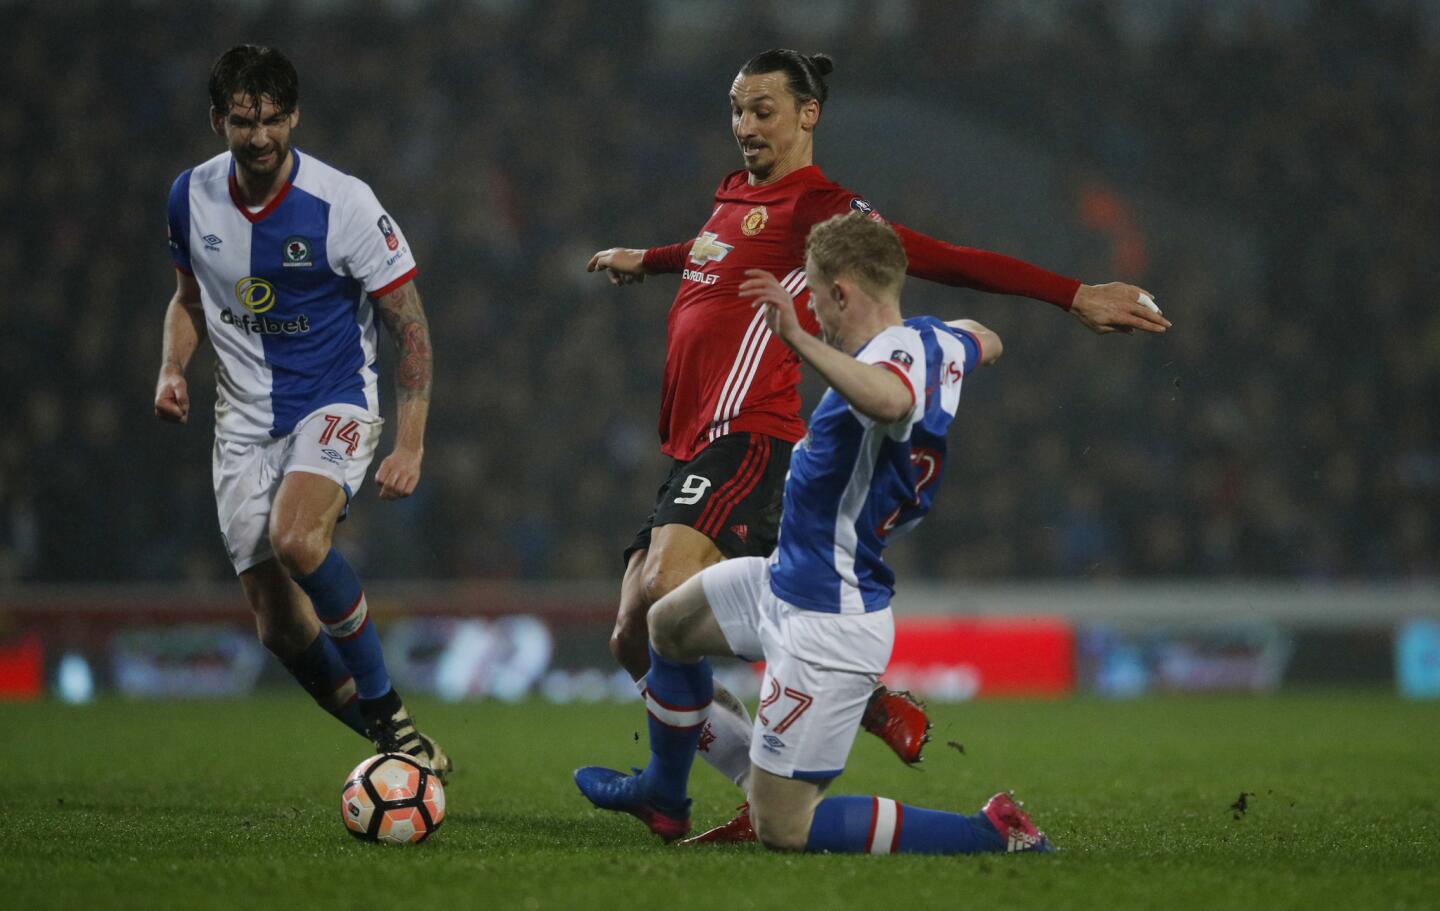 Britain Football Soccer - Blackburn Rovers v Manchester United - FA Cup Fifth Round - Ewood Park - 19/2/17 Manchester United's Zlatan Ibrahimovic in action with Blackburn Rovers' Willem Tomlinson Reuters / Phil Noble Livepic EDITORIAL USE ONLY. No use with unauthorized audio, video, data, fixture lists, club/league logos or "live" services. Online in-match use limited to 45 images, no video emulation. No use in betting, games or single club/league/player publications. Please contact your account representative for further details. ** Usable by SD ONLY **